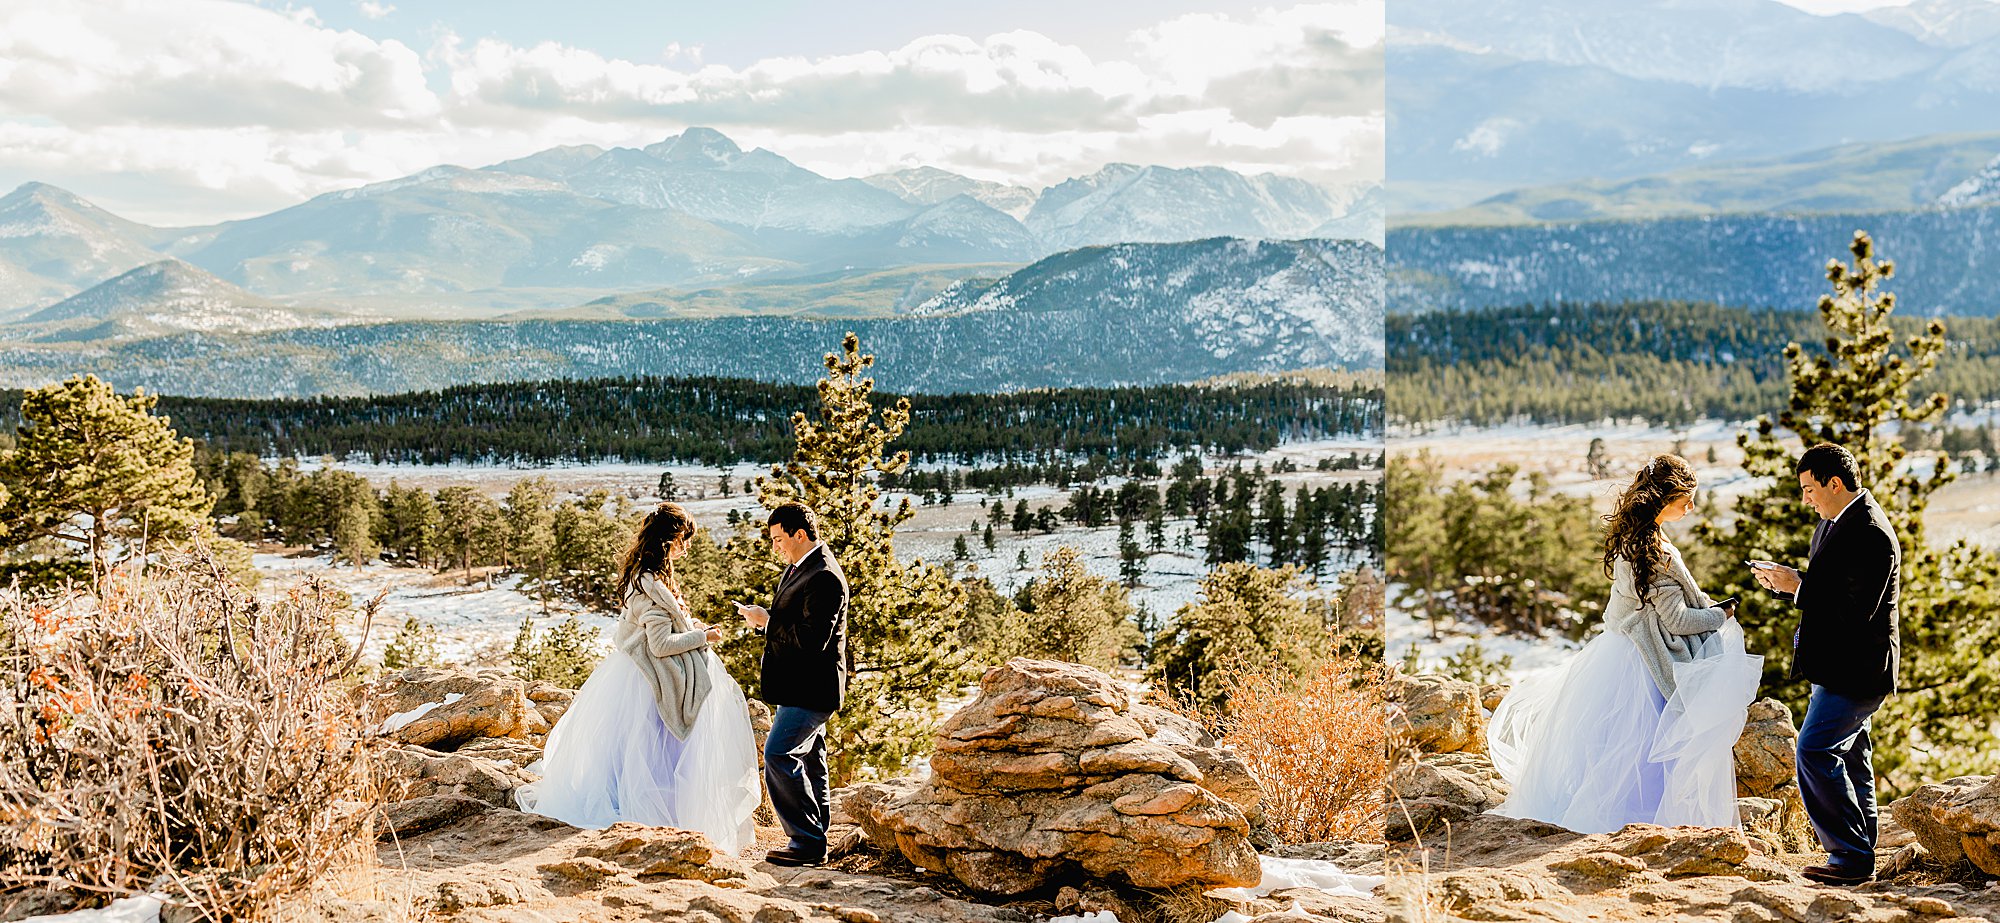 couple shares vows at 3m curve in rocky mountain national park with a beautiful mountain view in the background, photo by lauren casino photography